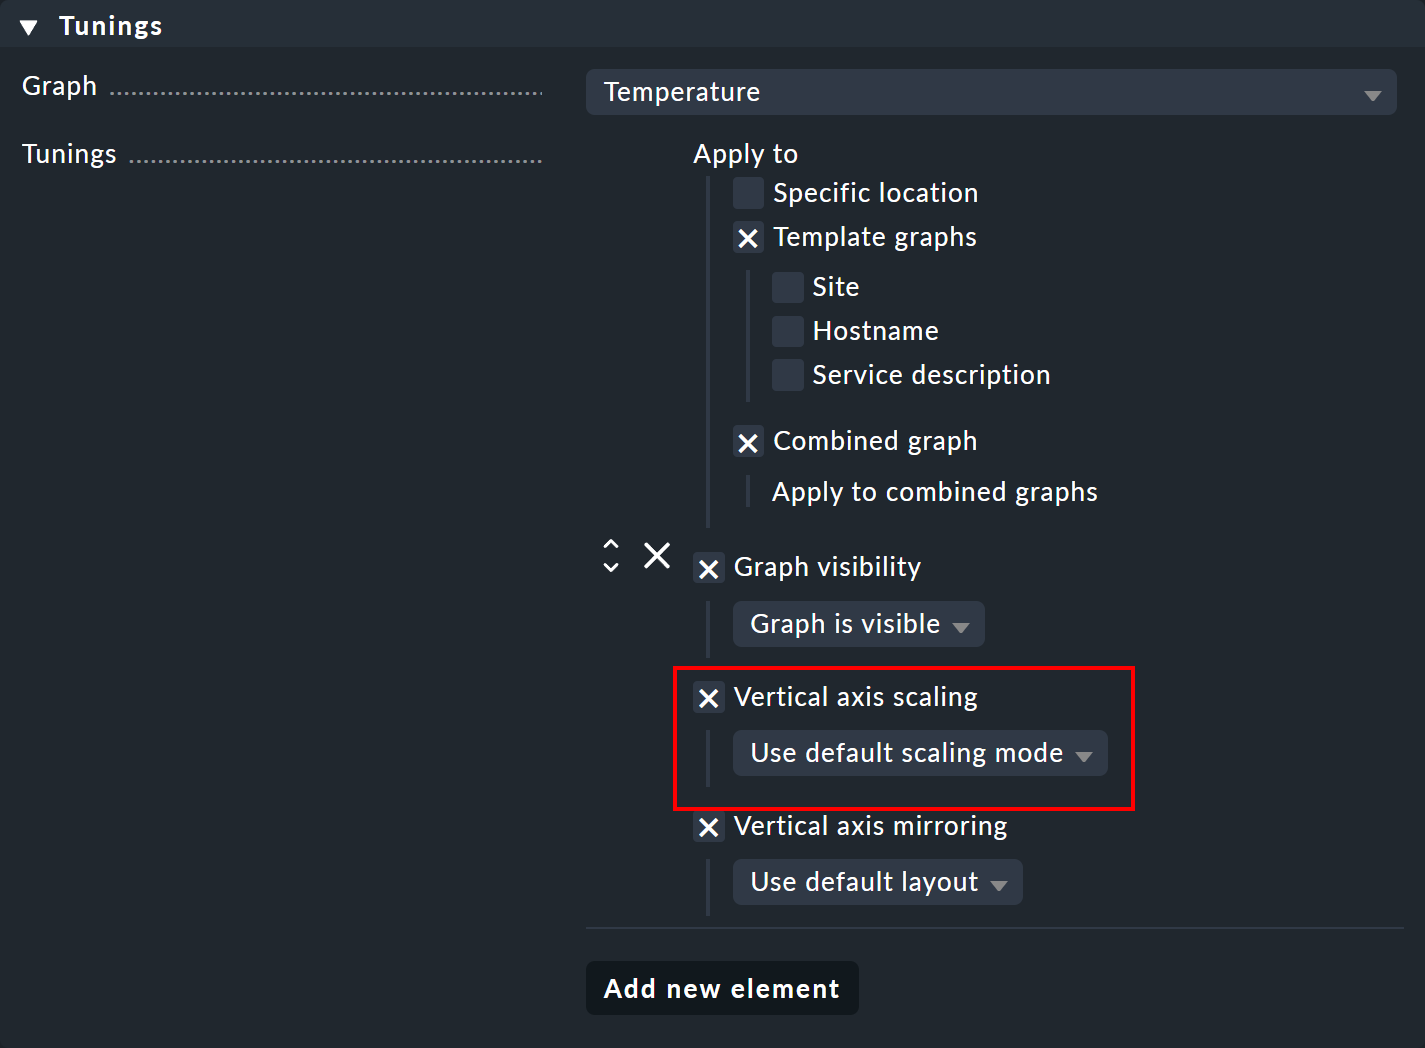 The settings for customizing a graph.